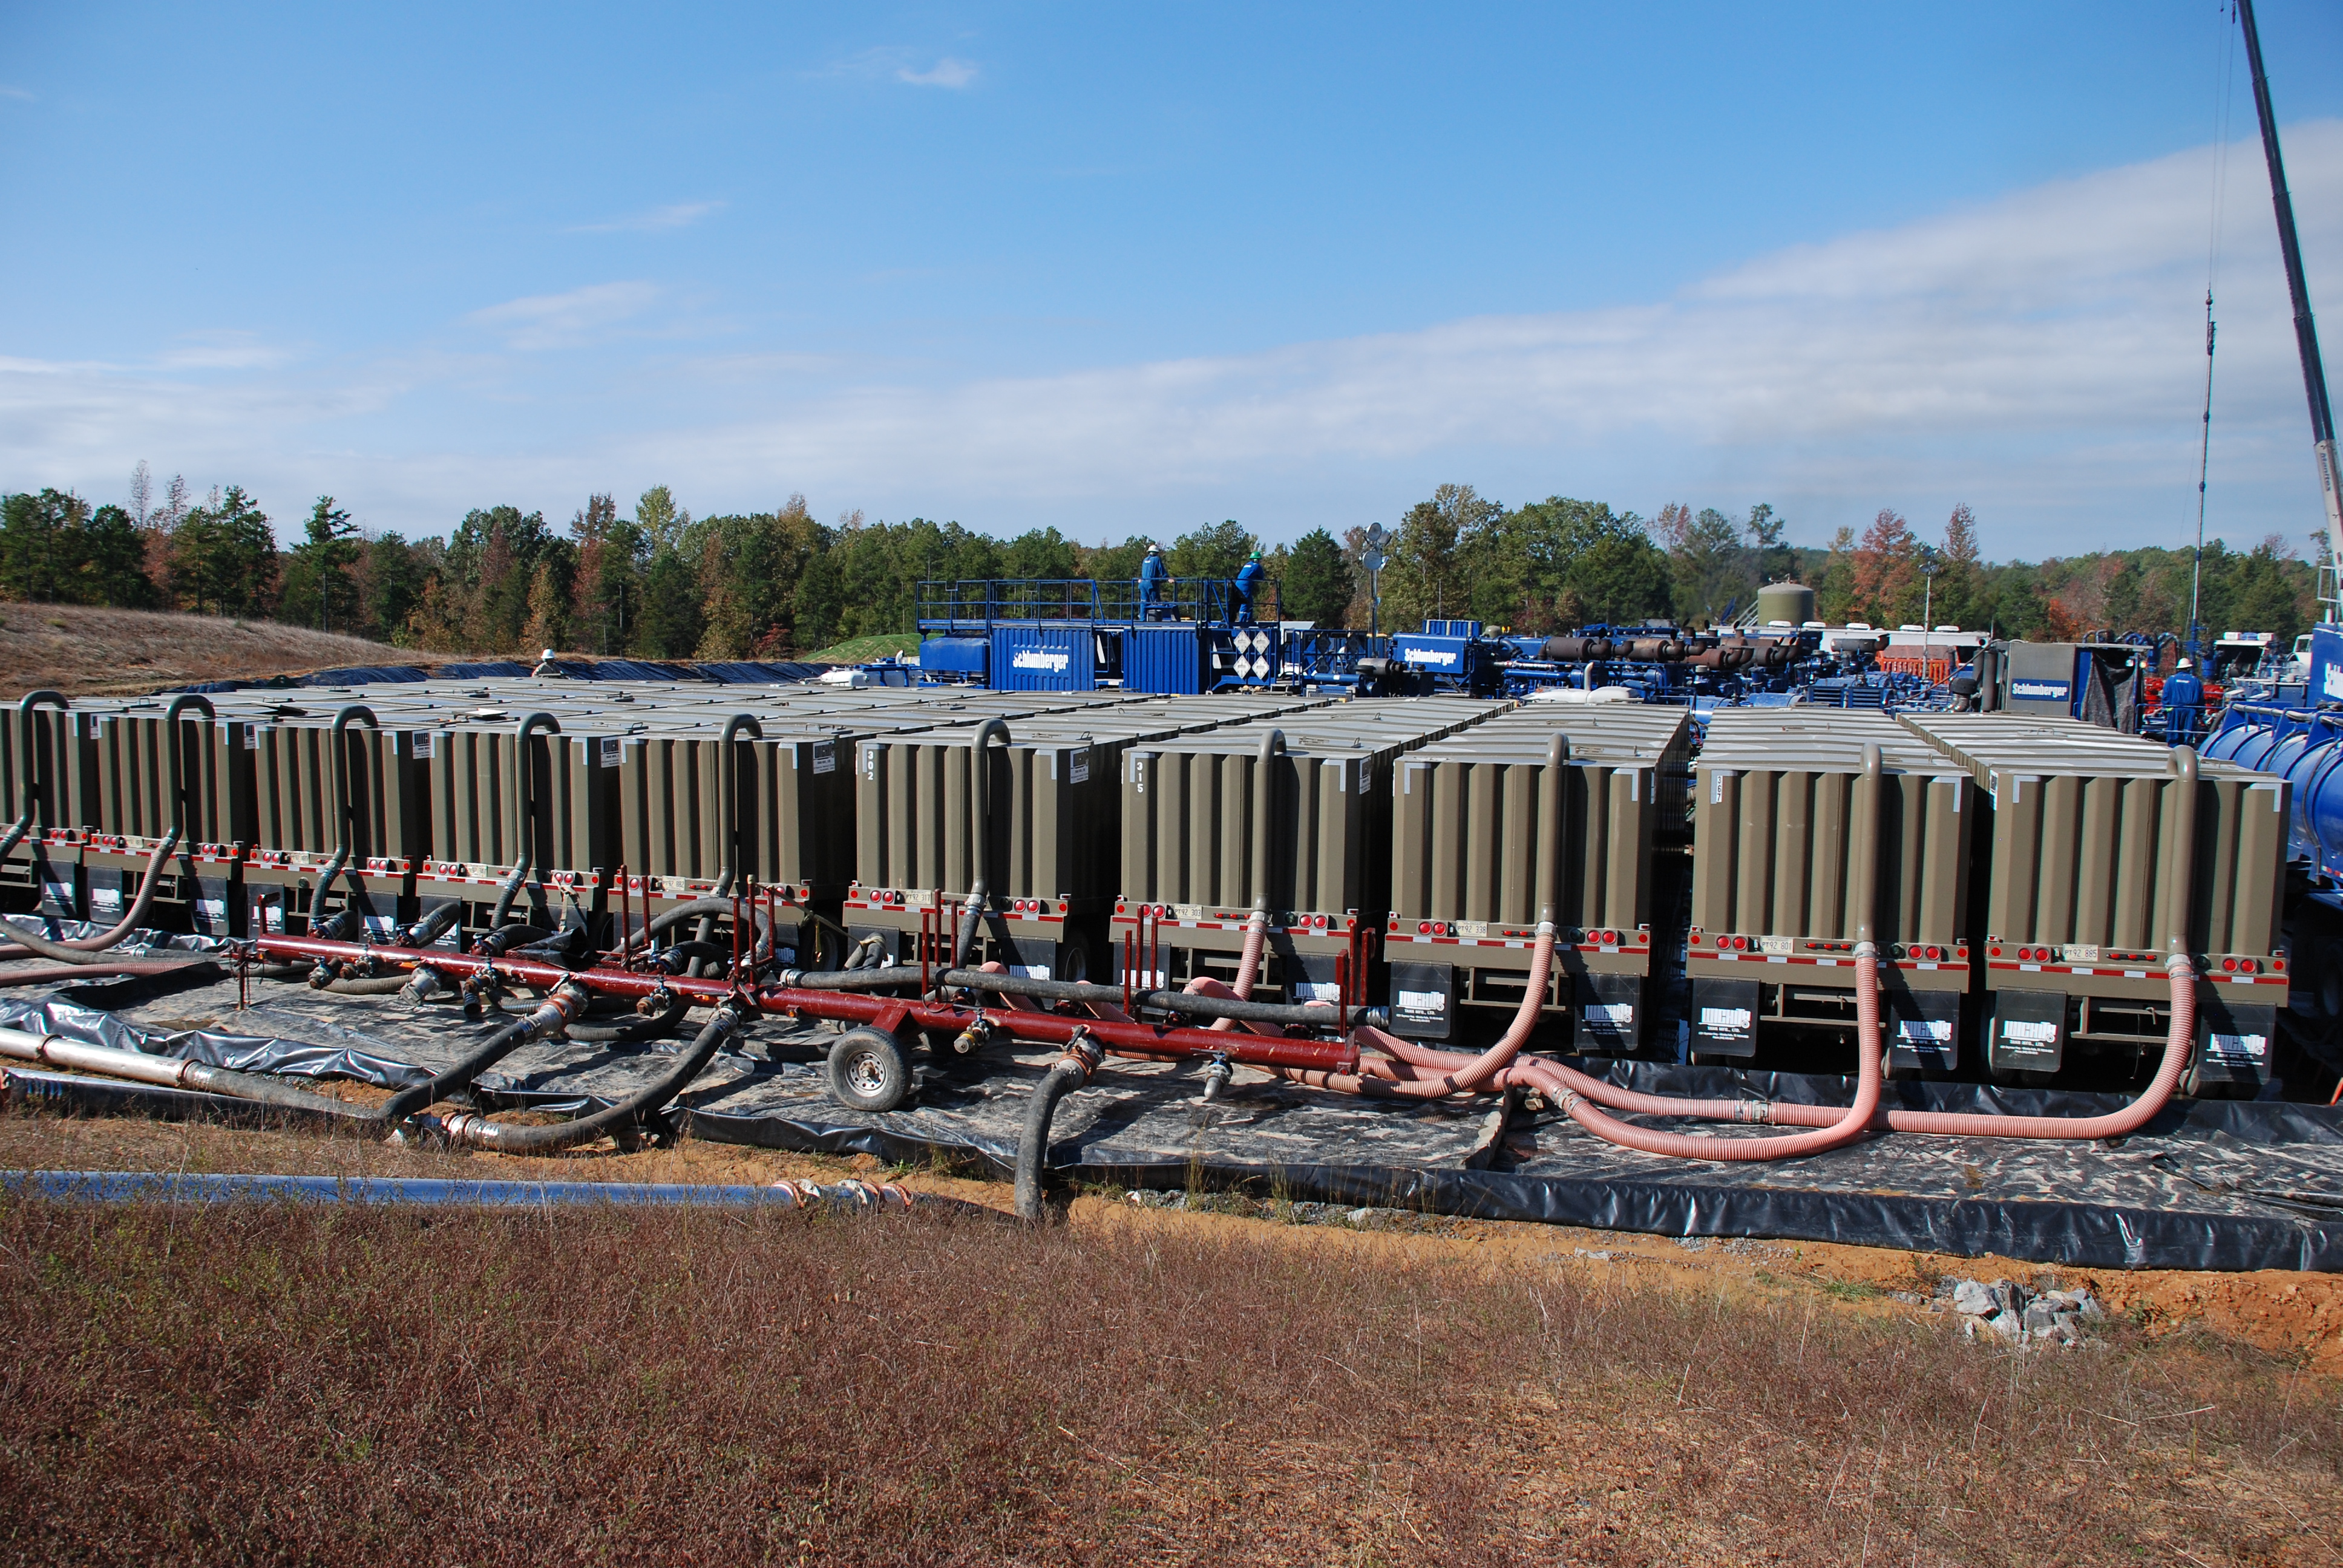 Tanks like these in the Fayetteville Shale area (Arkansas) are commonly used to supply the water required for hydraulic fracturing operations.